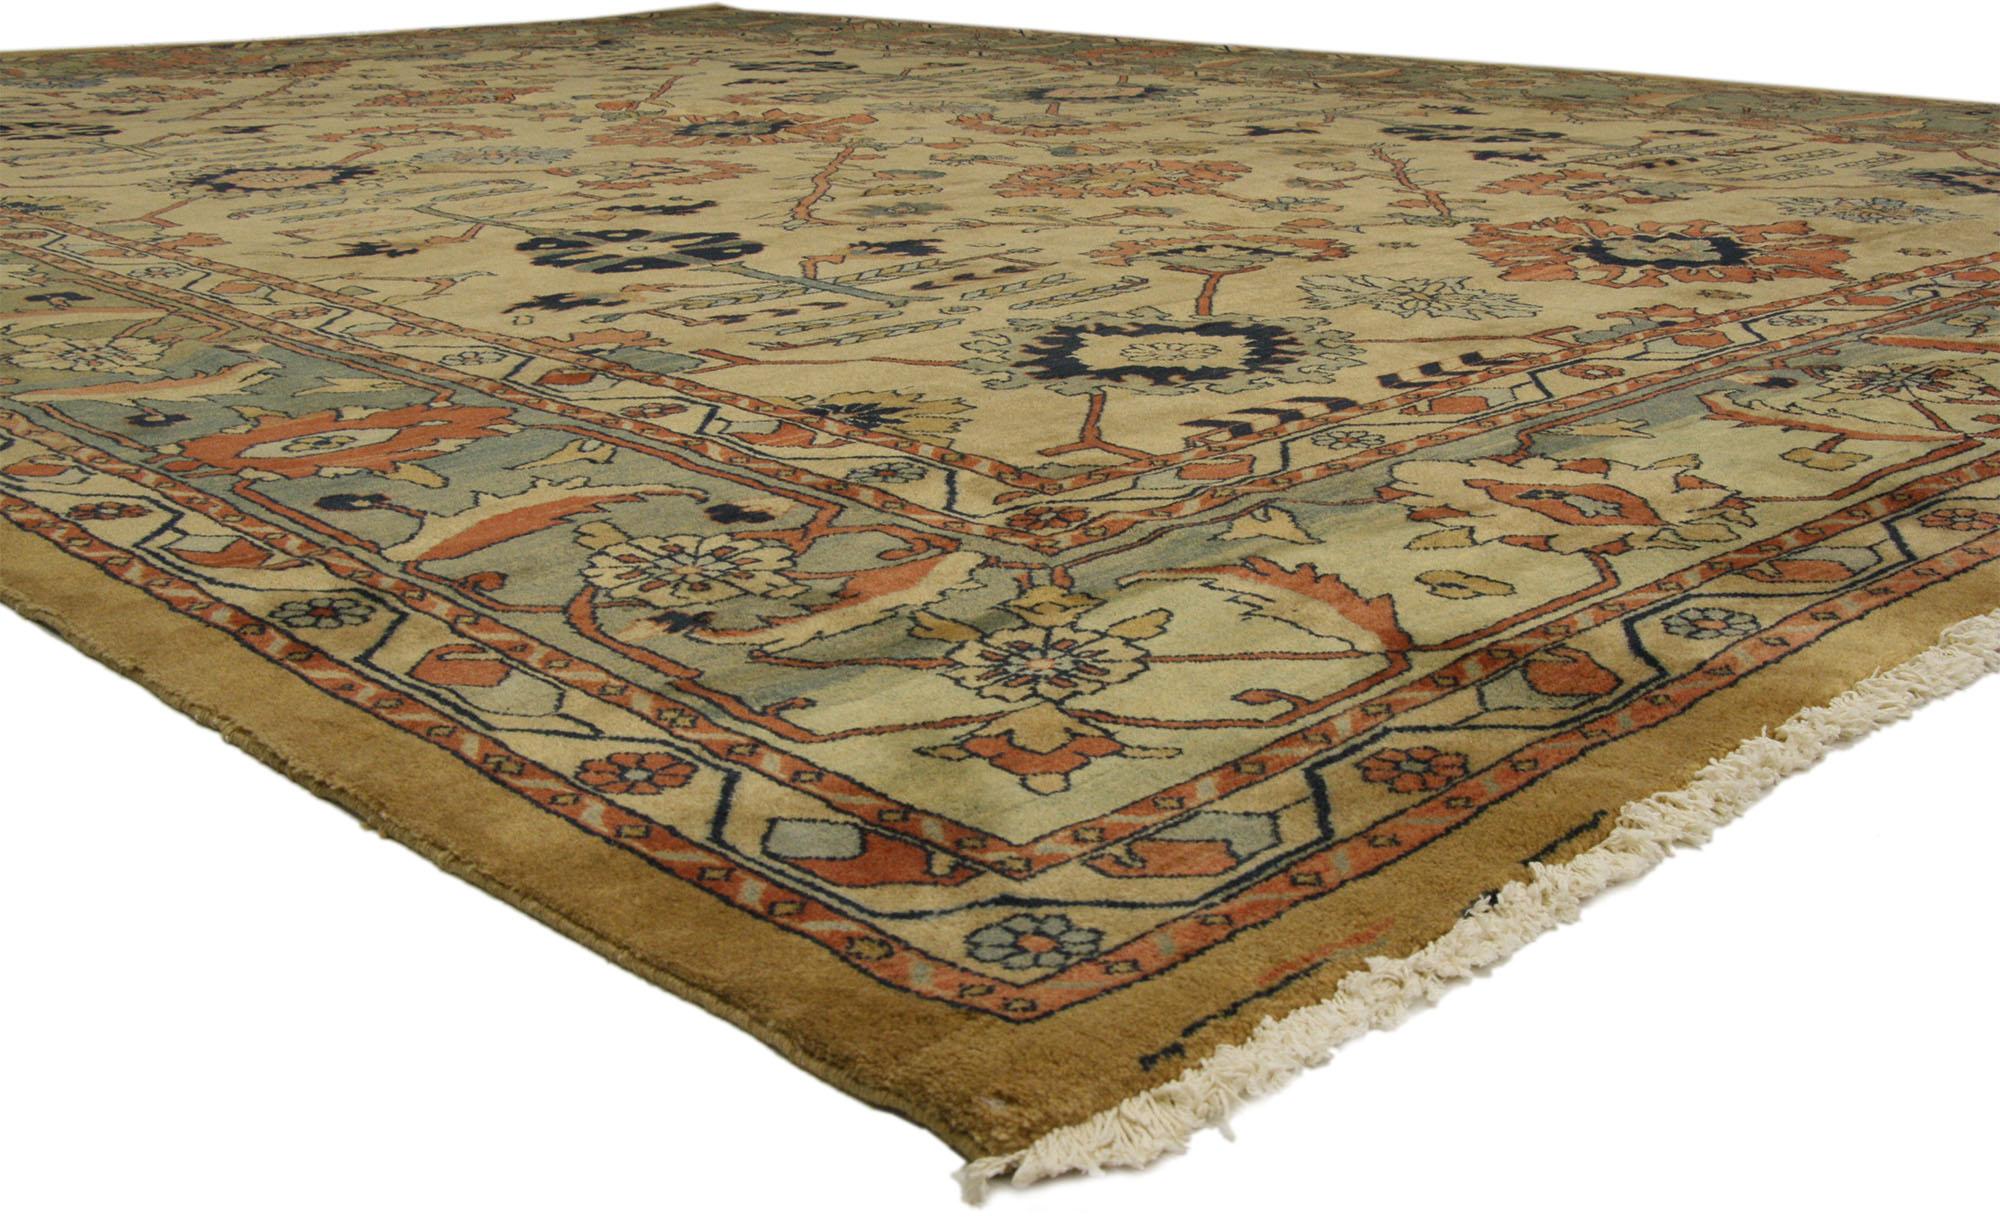 75828 Oversized Vintage Mahal Persian Rug, 13'04 x 18'04. With architectural elements of rectilinear lines combined with curved forms, this hand knotted wool vintage Persian Mahal rug embodies Arts and Craft style. The vintage Persian Mahal rug is